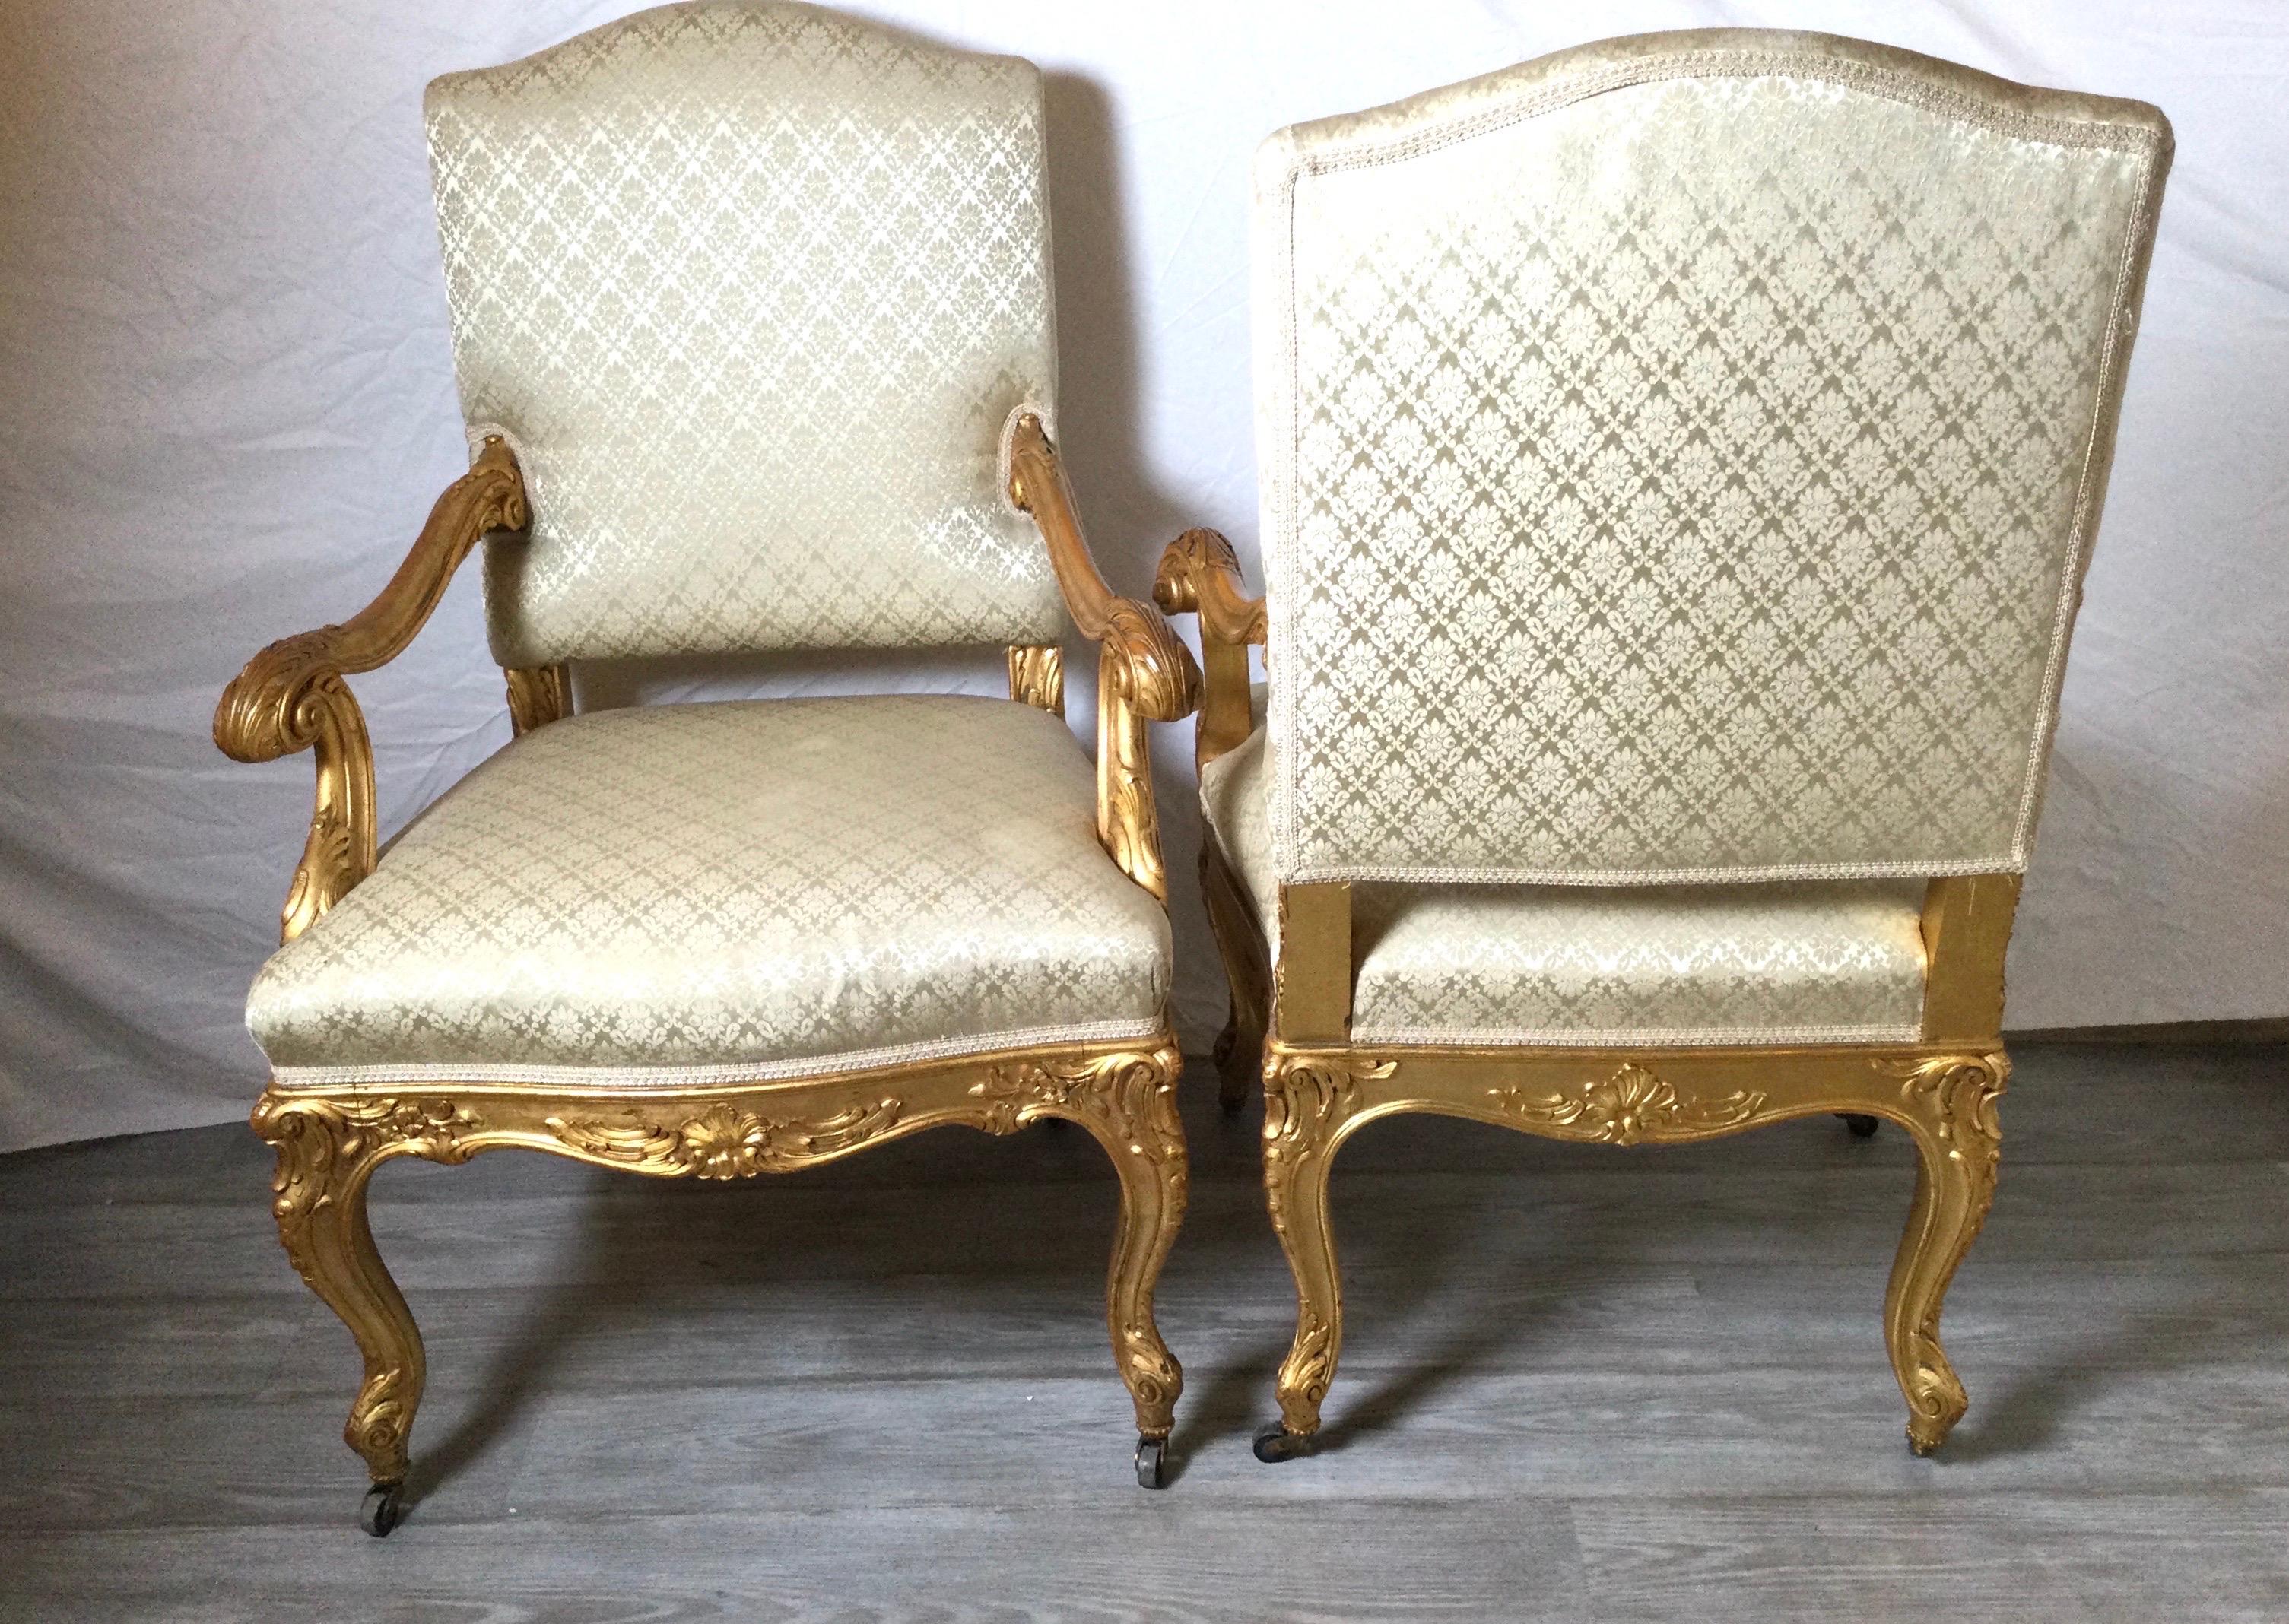 Louis XV Exceptional Pair of Antique French Fauteuil Chairs